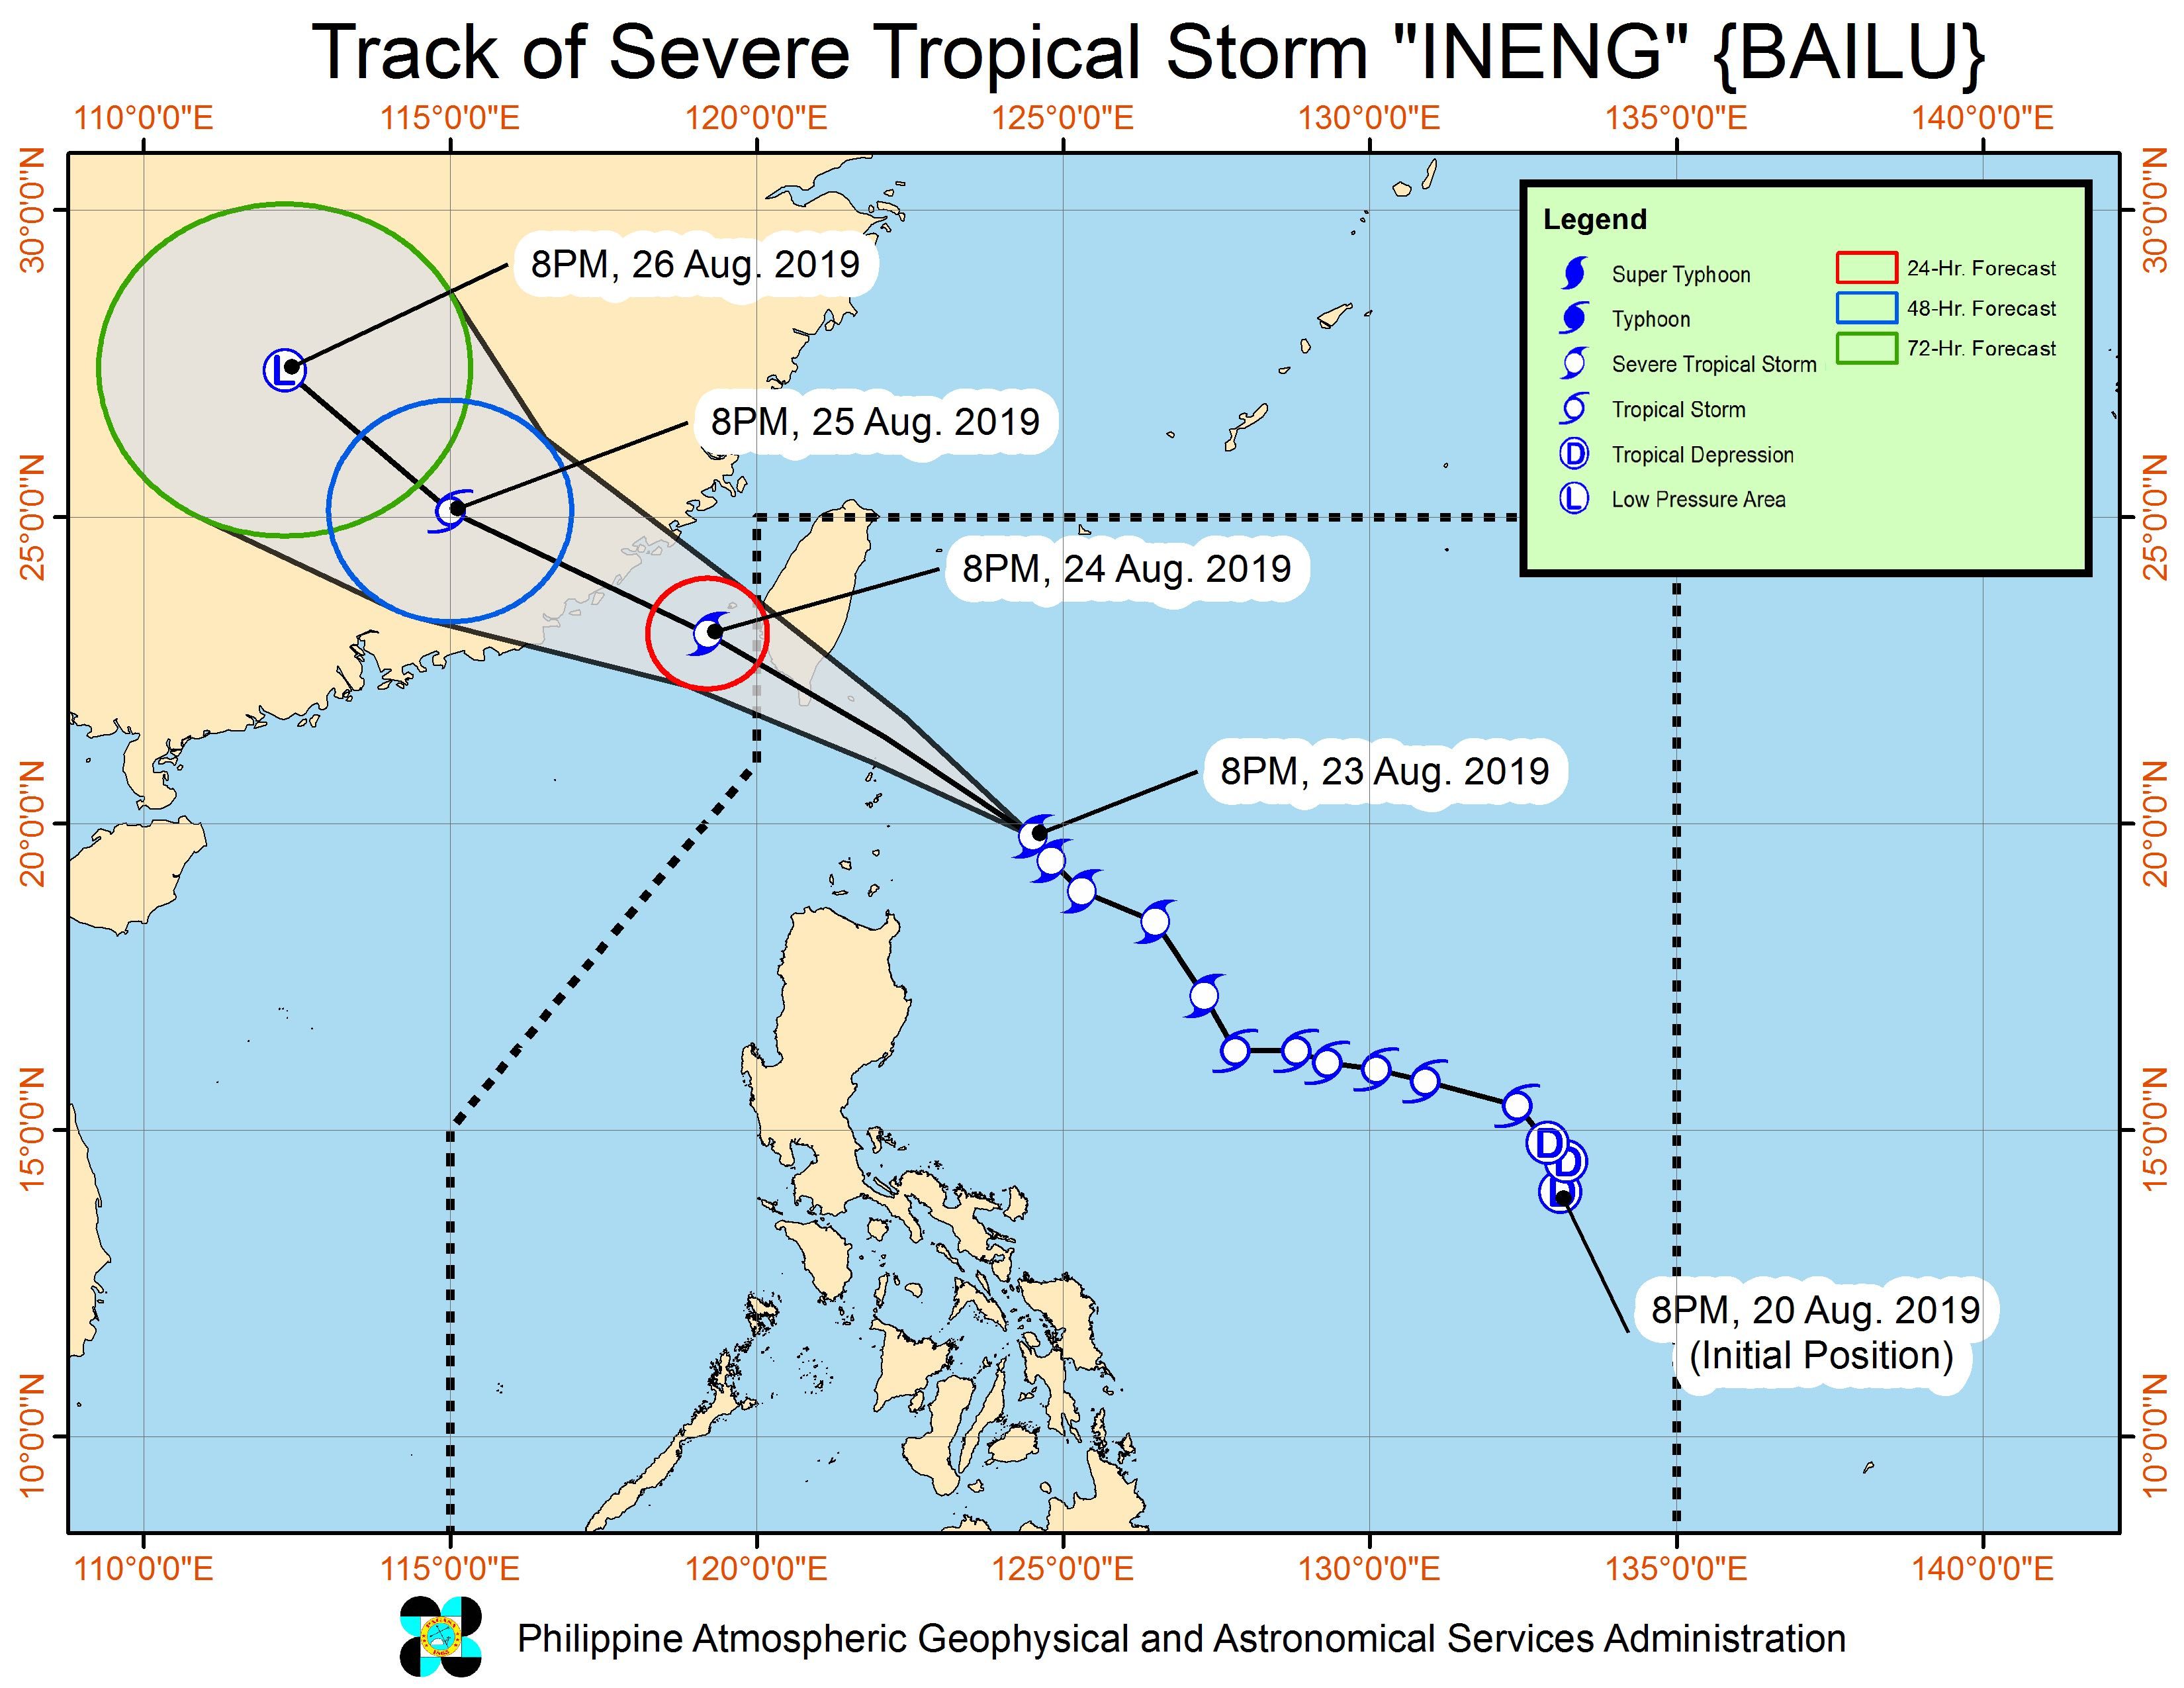 Forecast track of Severe Tropical Storm Ineng (Bailu) as of August 23, 2019, 11 pm. Image from PAGASA 